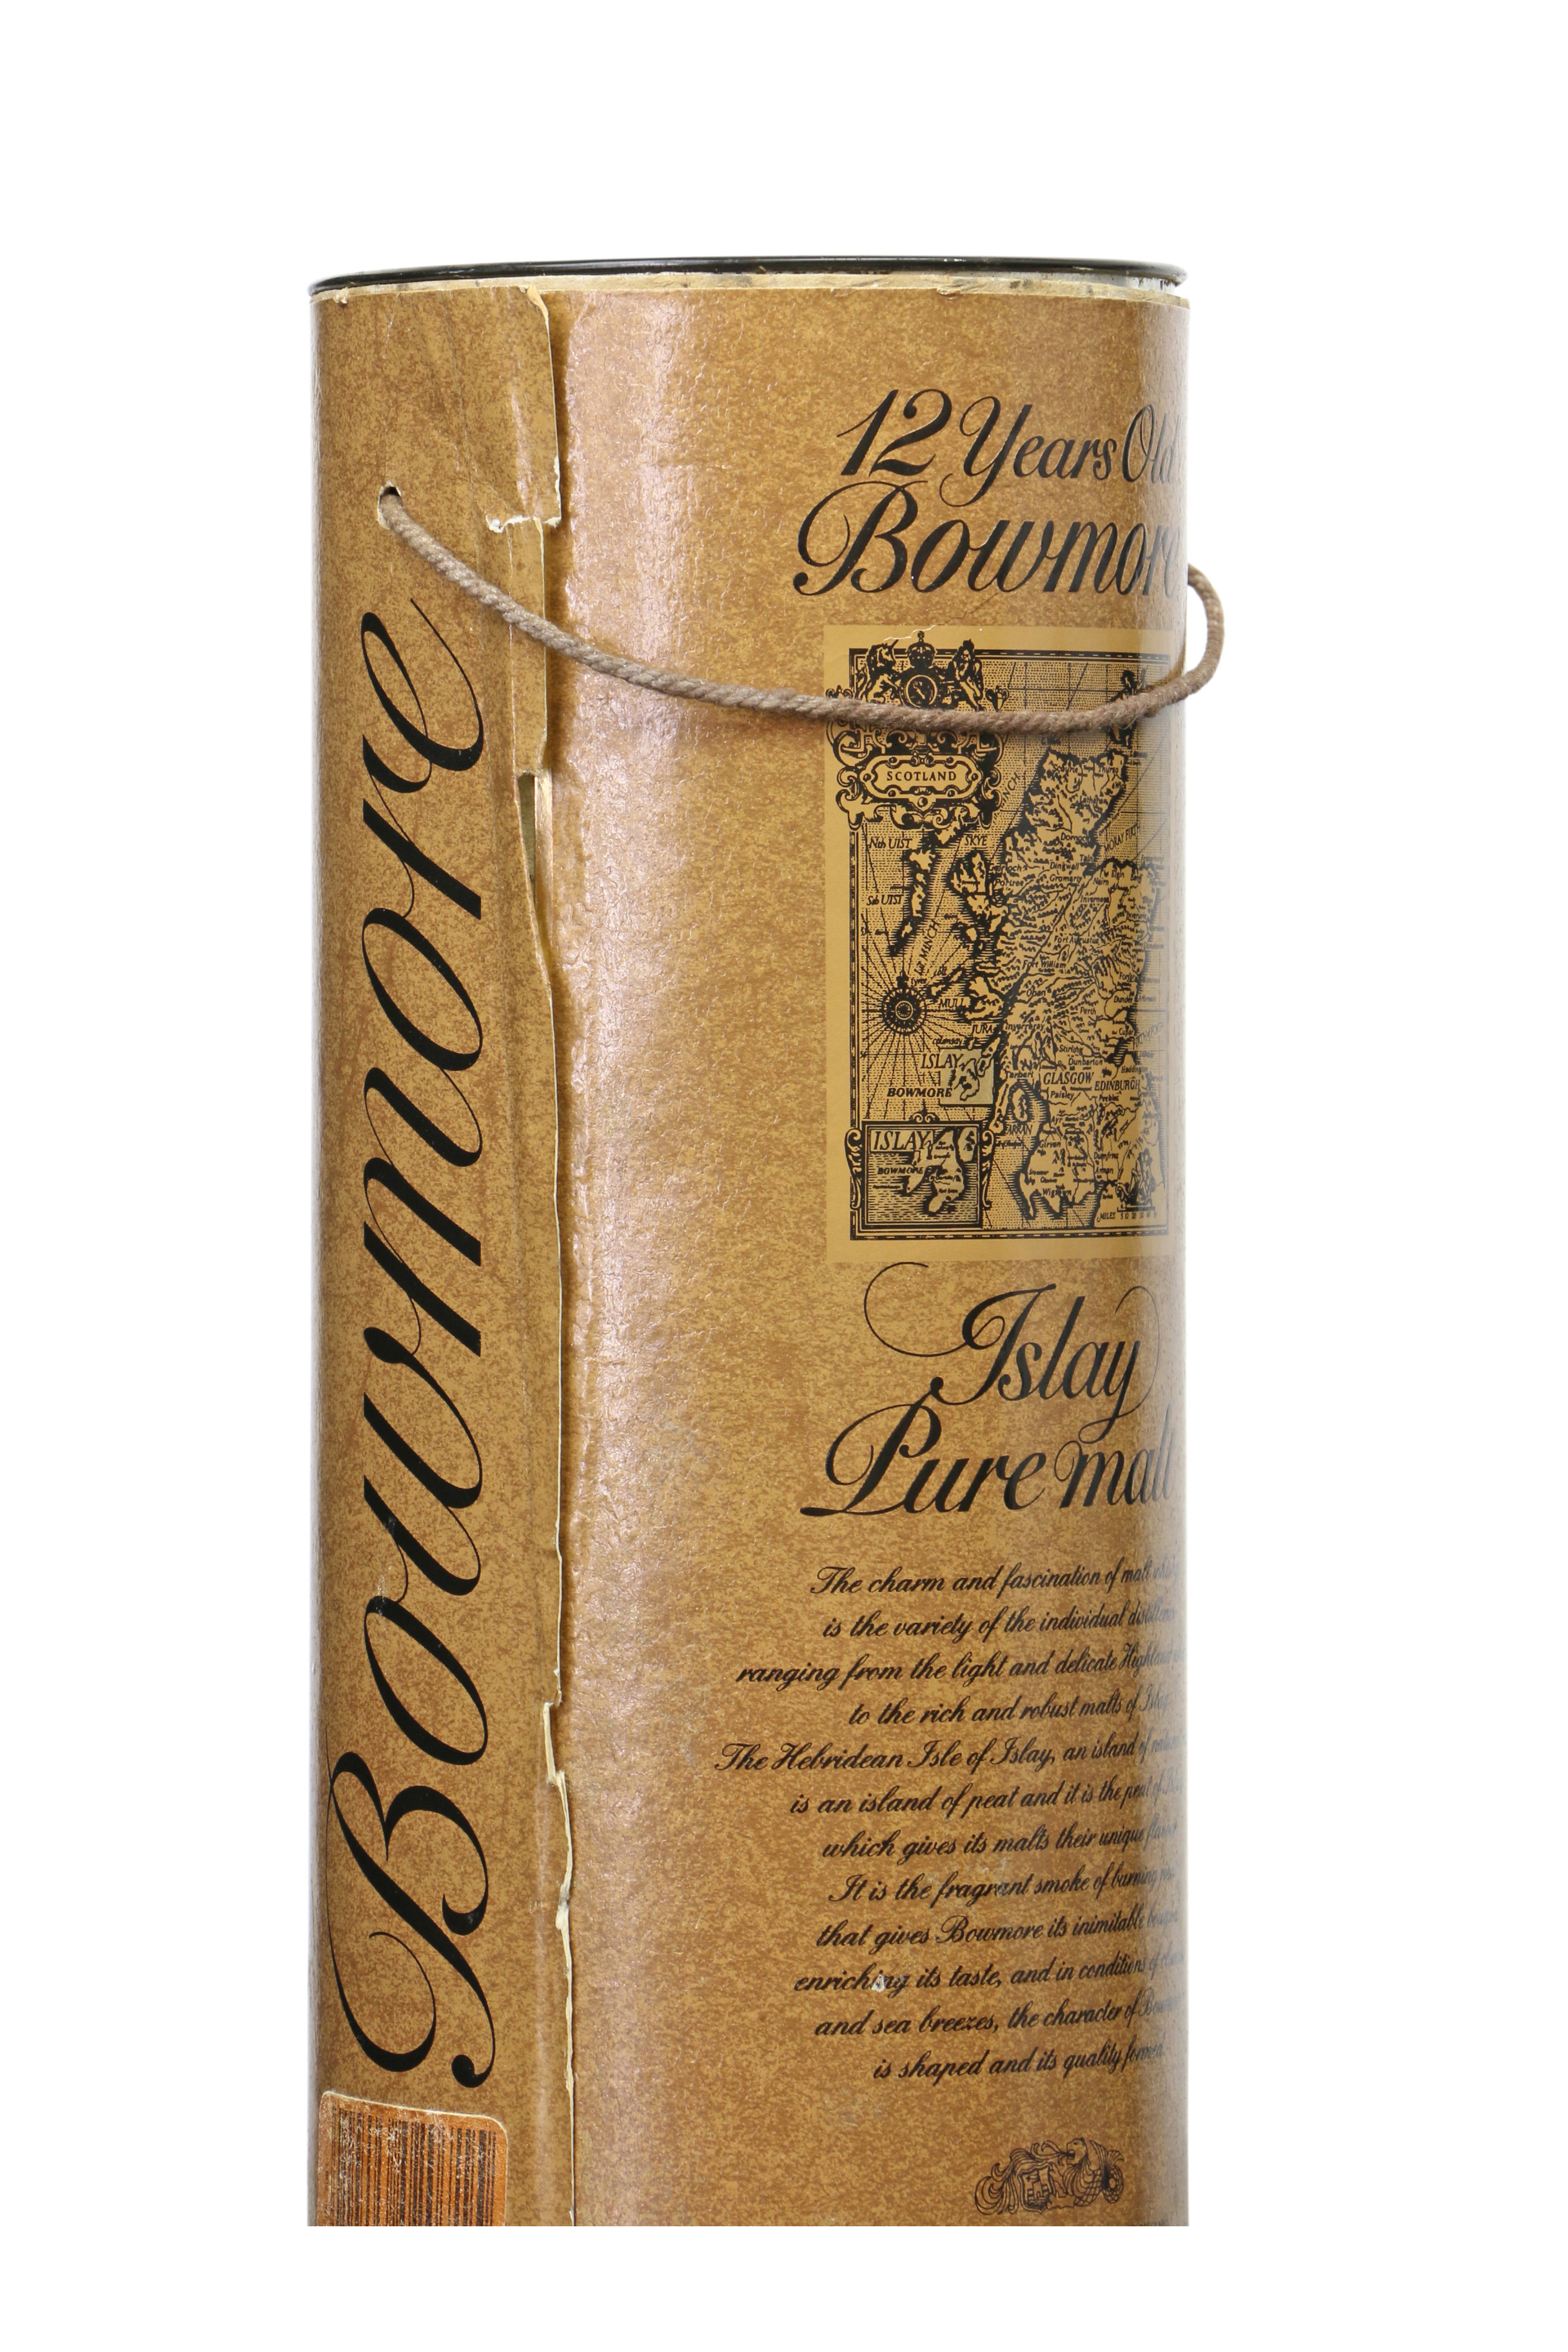 Bowmore 12 Years Old - Dumpy (75 cl) - Just Whisky Auctions